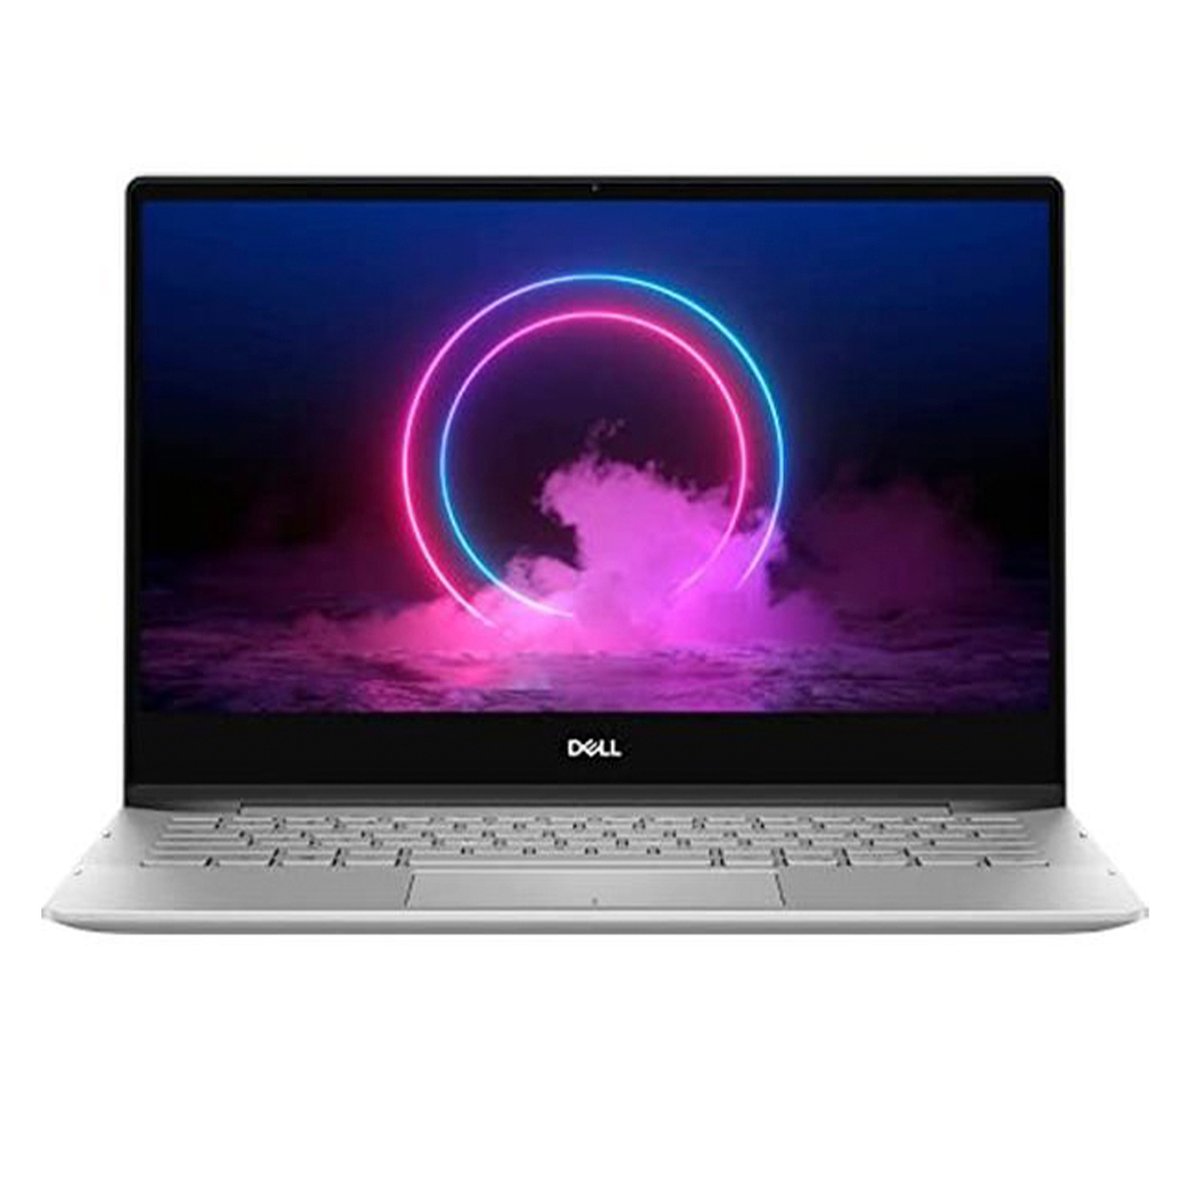 Dell Inspiron 13 (7391-INS-0022-SLR)2in1 Laptop,Intel® Core™ i7-10510U ,16GB RAM,1TB SSD,Intel® UHD Graphics with shared graphics memory,13.3" FHD Touch Screen,Silver